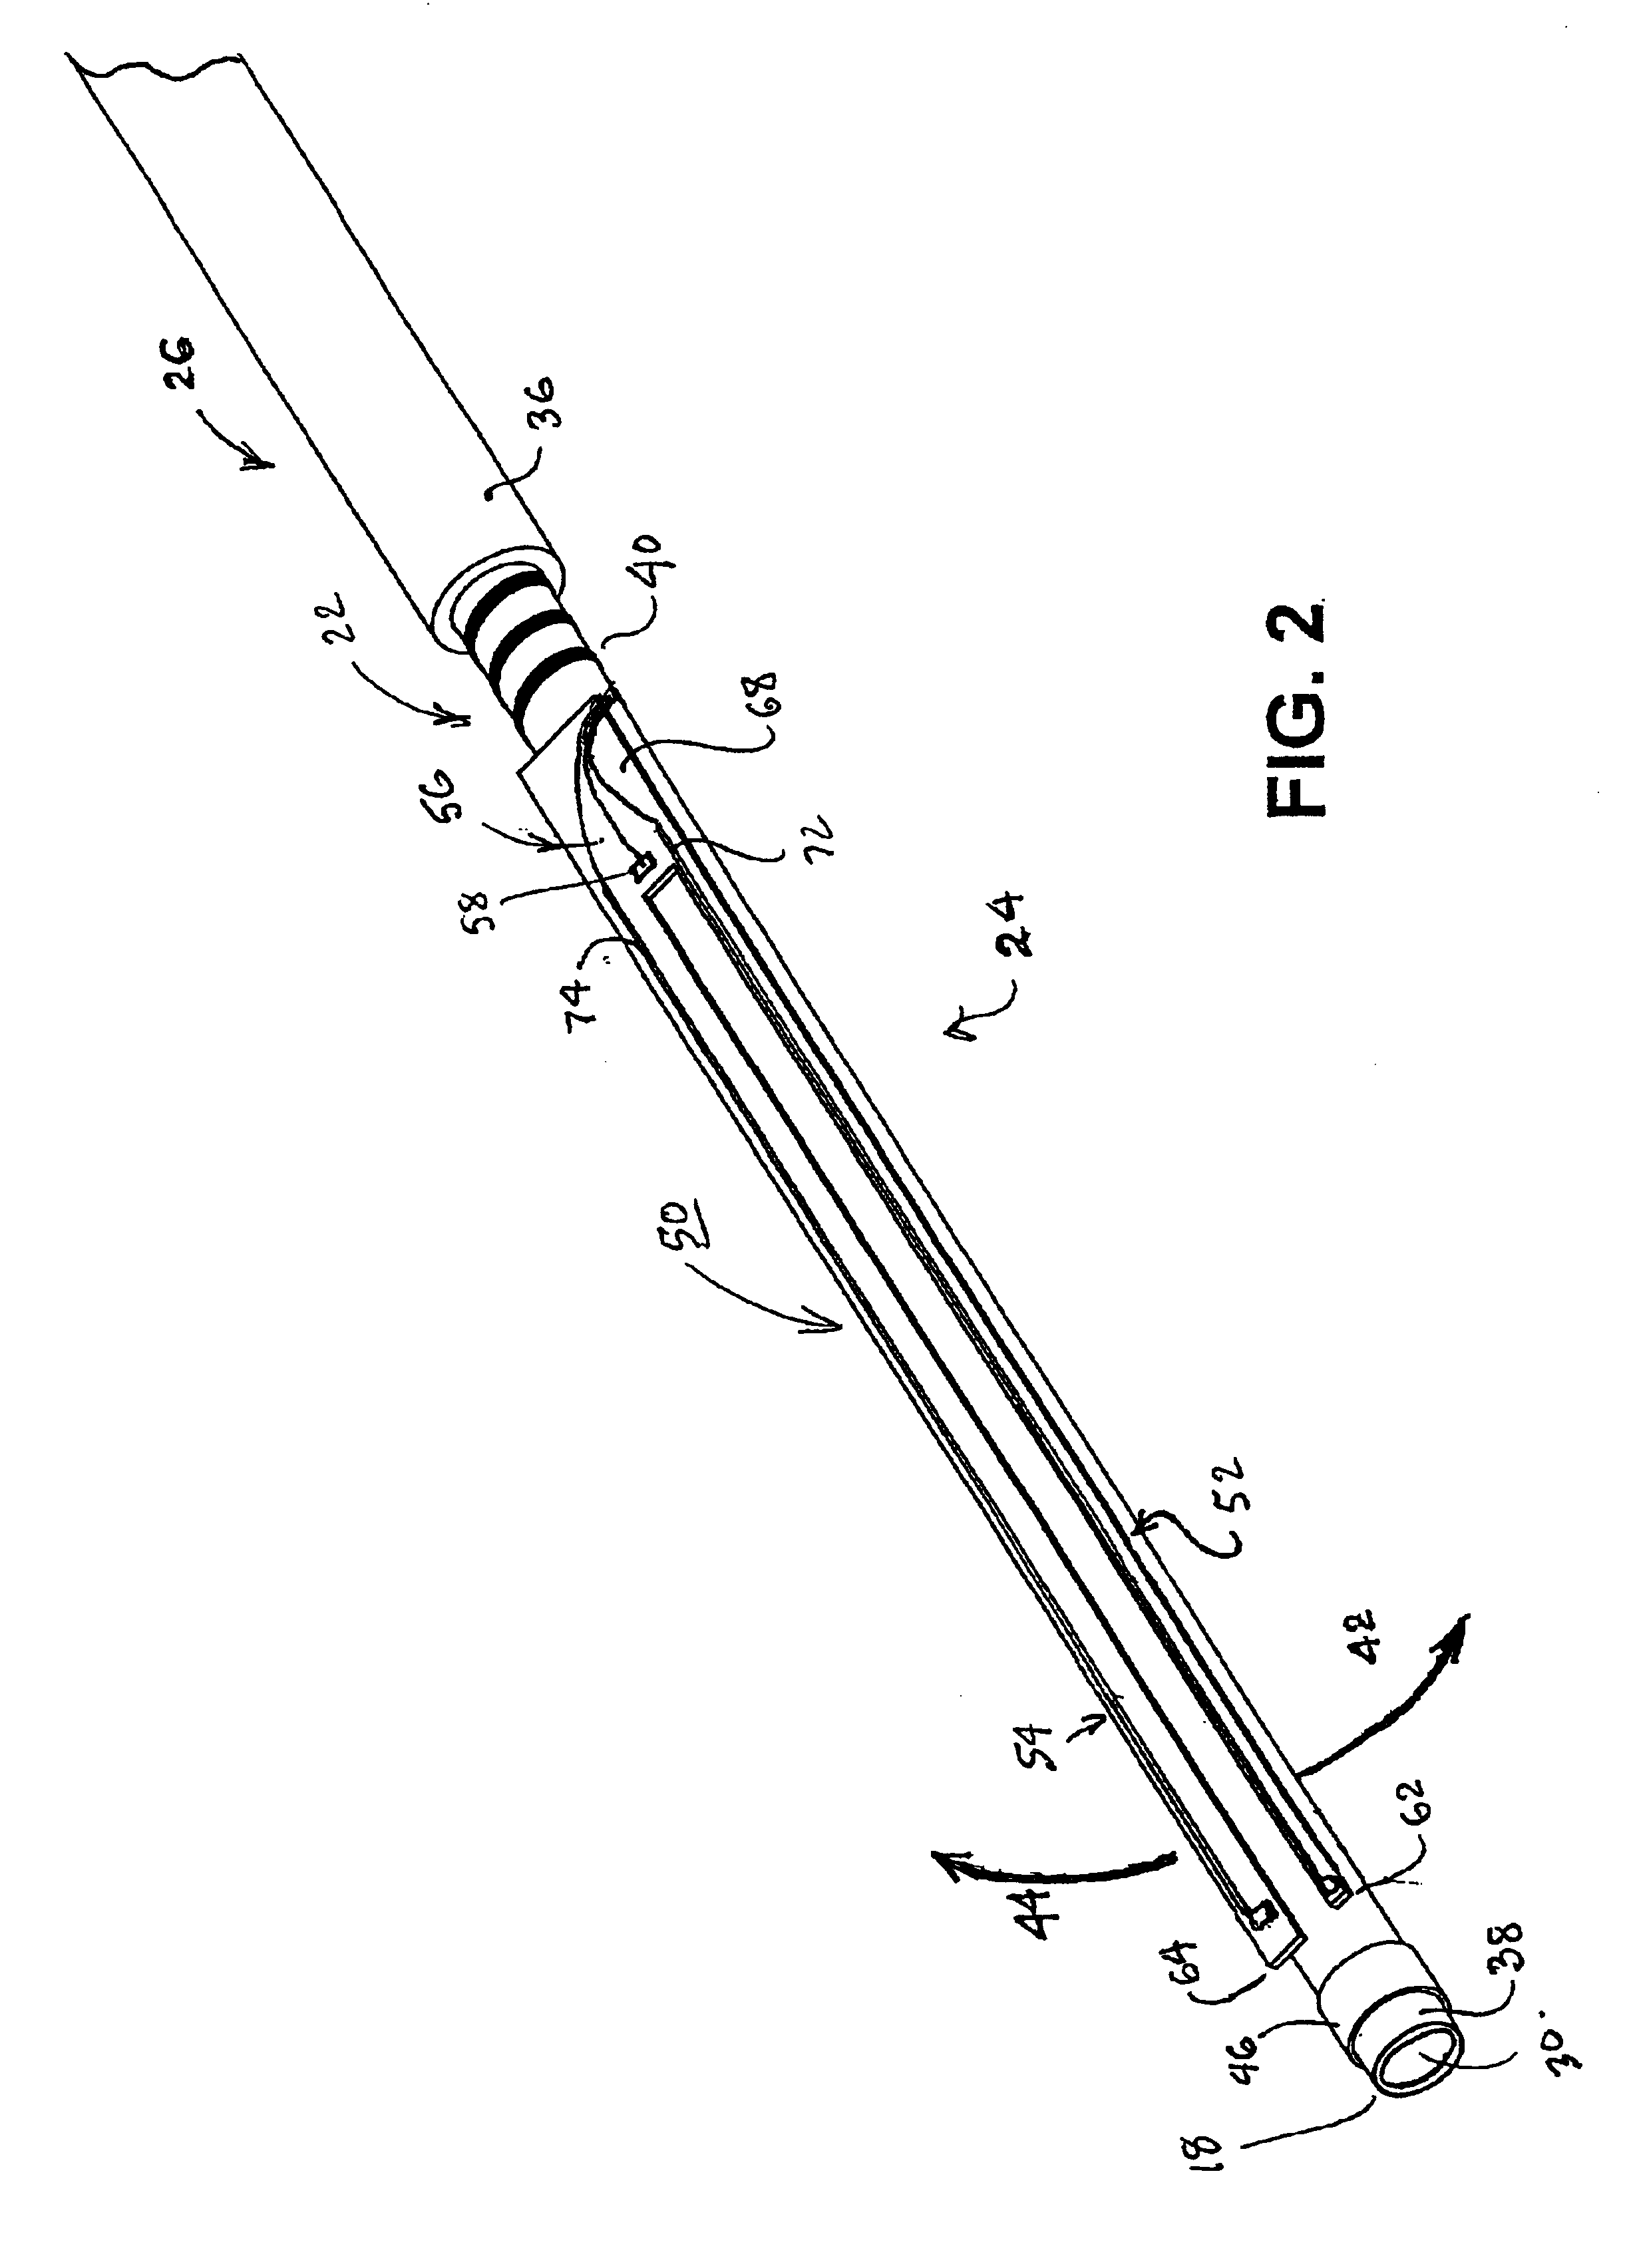 Methods and apparatus for imparting curves in elongated medical catheters